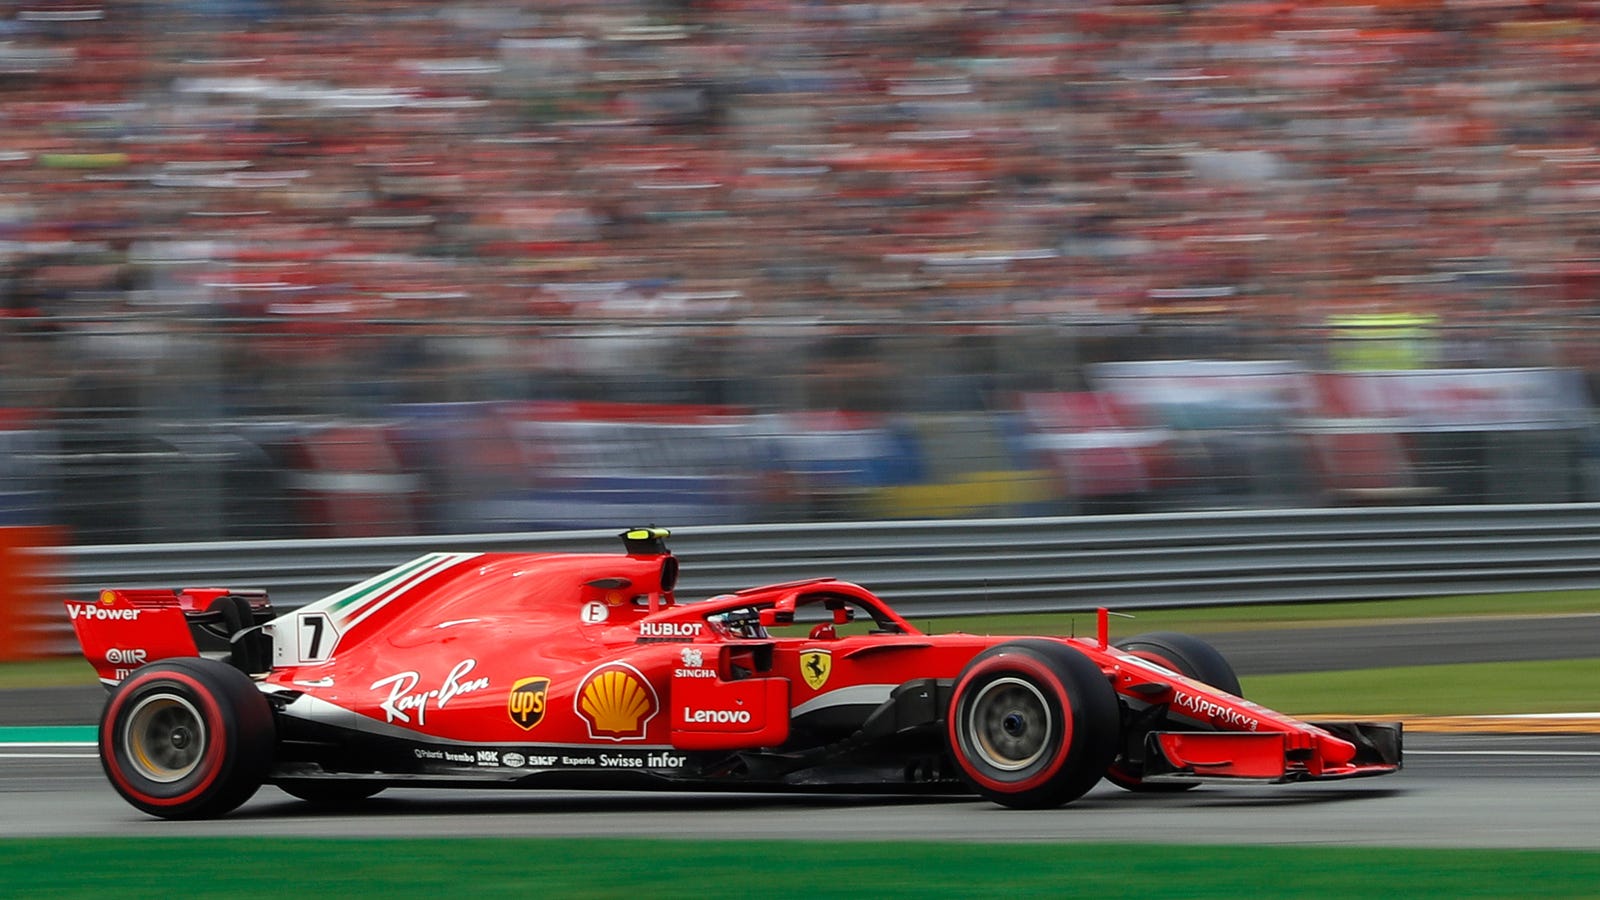 Kimi Raikkonen Sets the Fastest Lap in Formula One History With a Stellar Qualifying Run at Monza